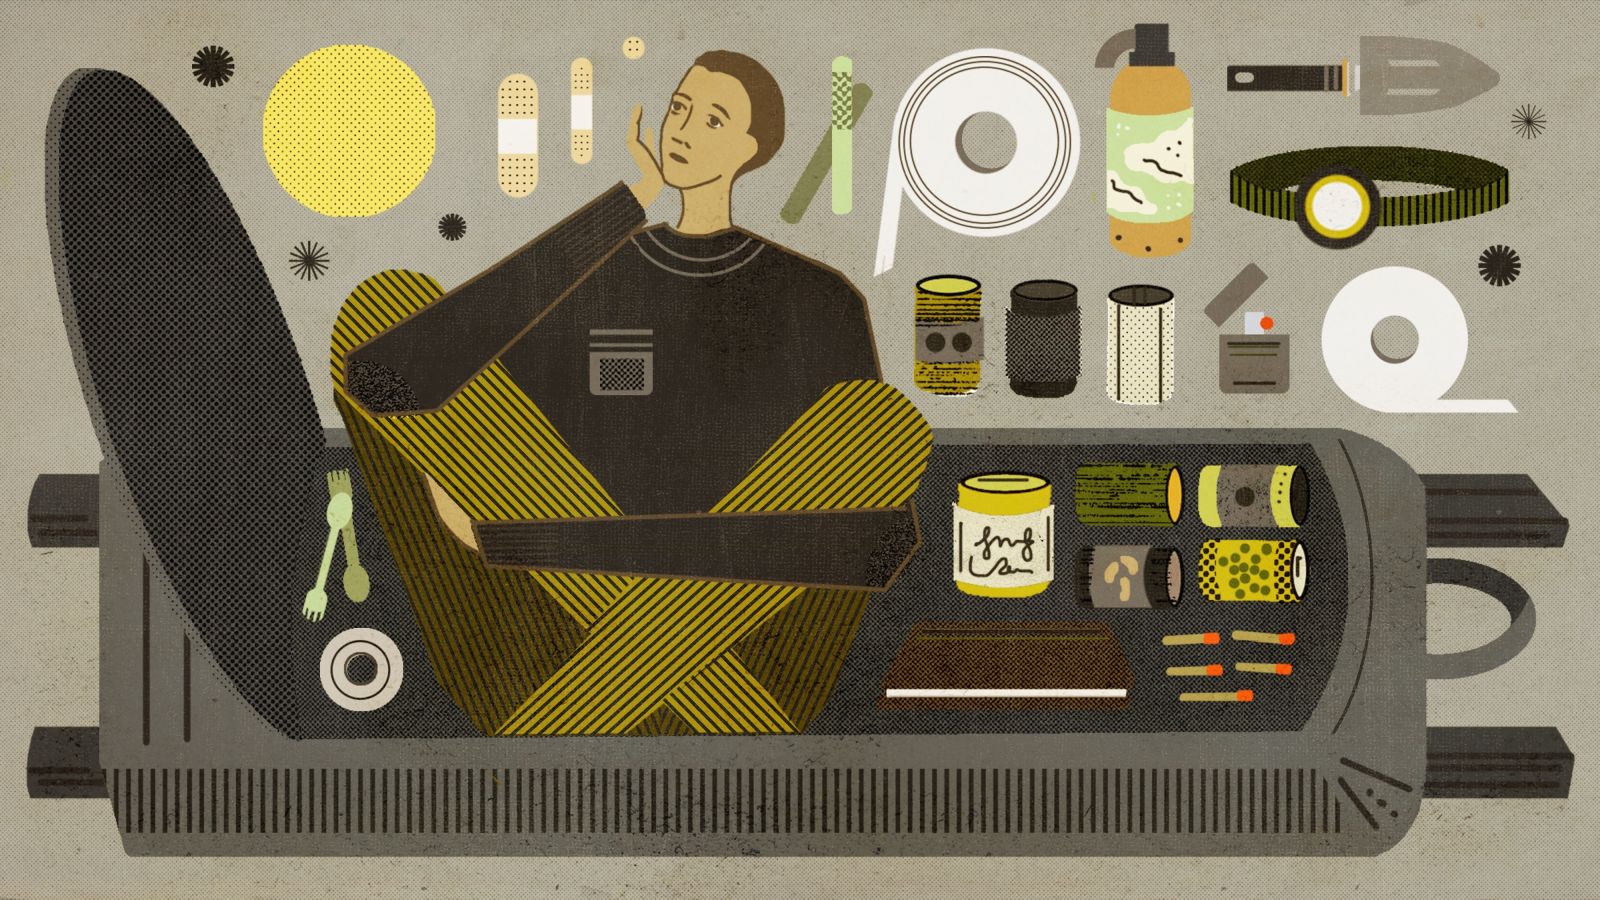 Illustration for article titled Practical Prepping